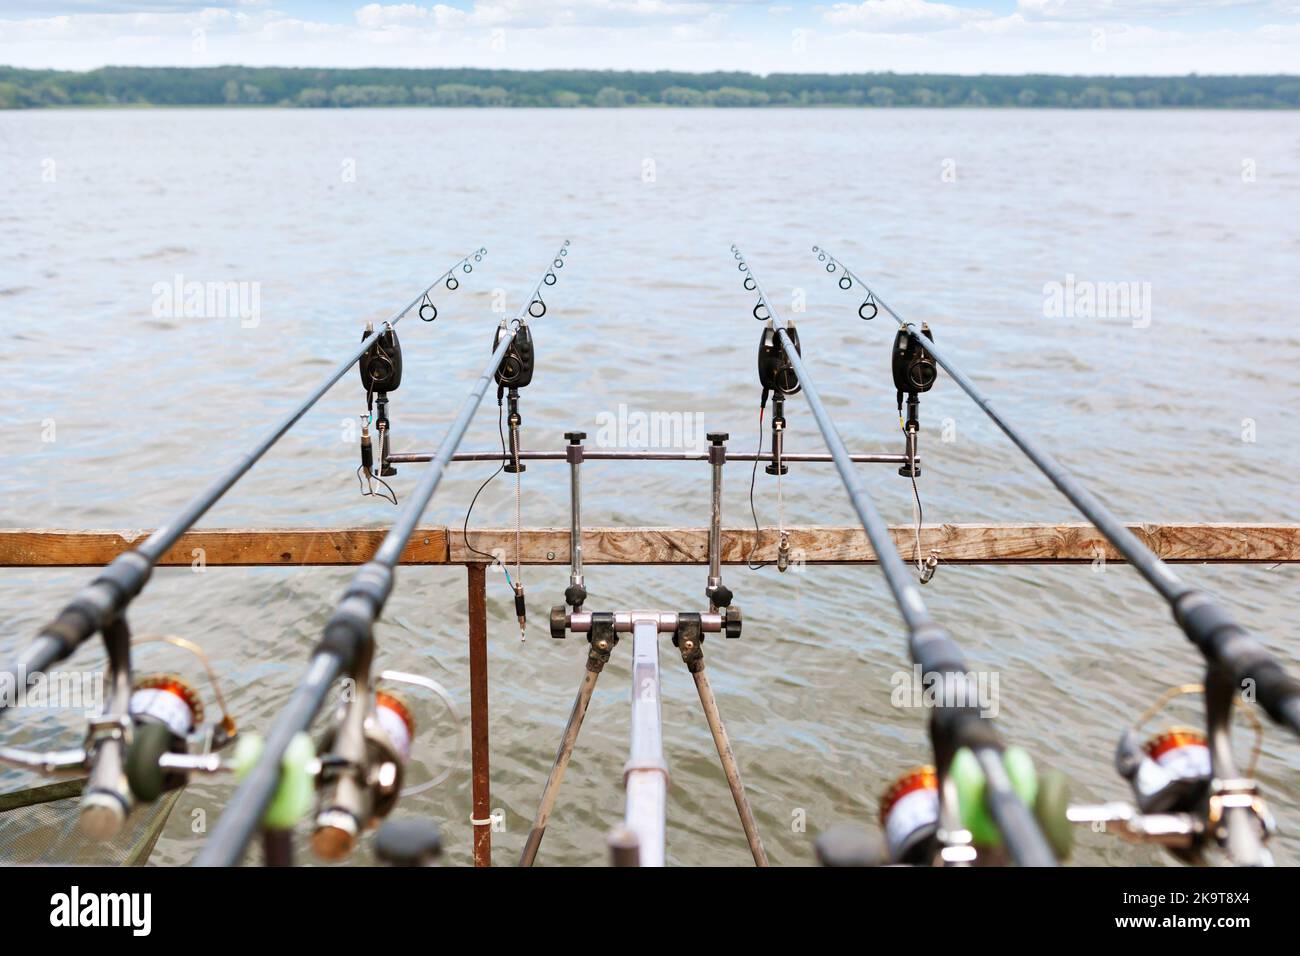 https://c8.alamy.com/comp/2K9T8X4/four-thrown-fishing-rods-with-equipped-fishing-bite-alarm-2K9T8X4.jpg